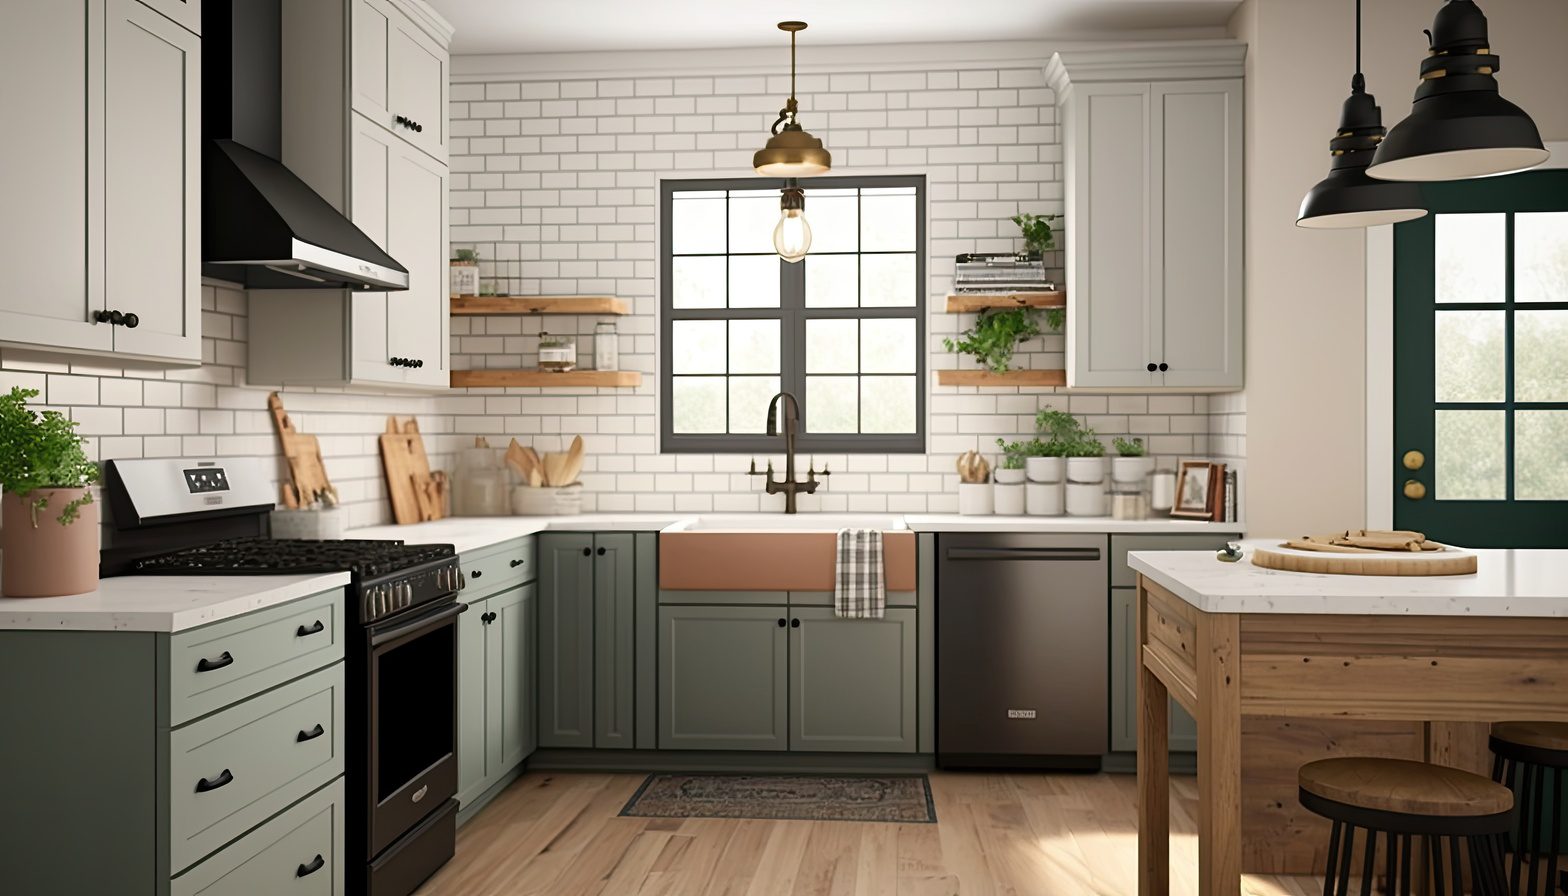 A modern farmhouse kitchen with shaker - style cabinets